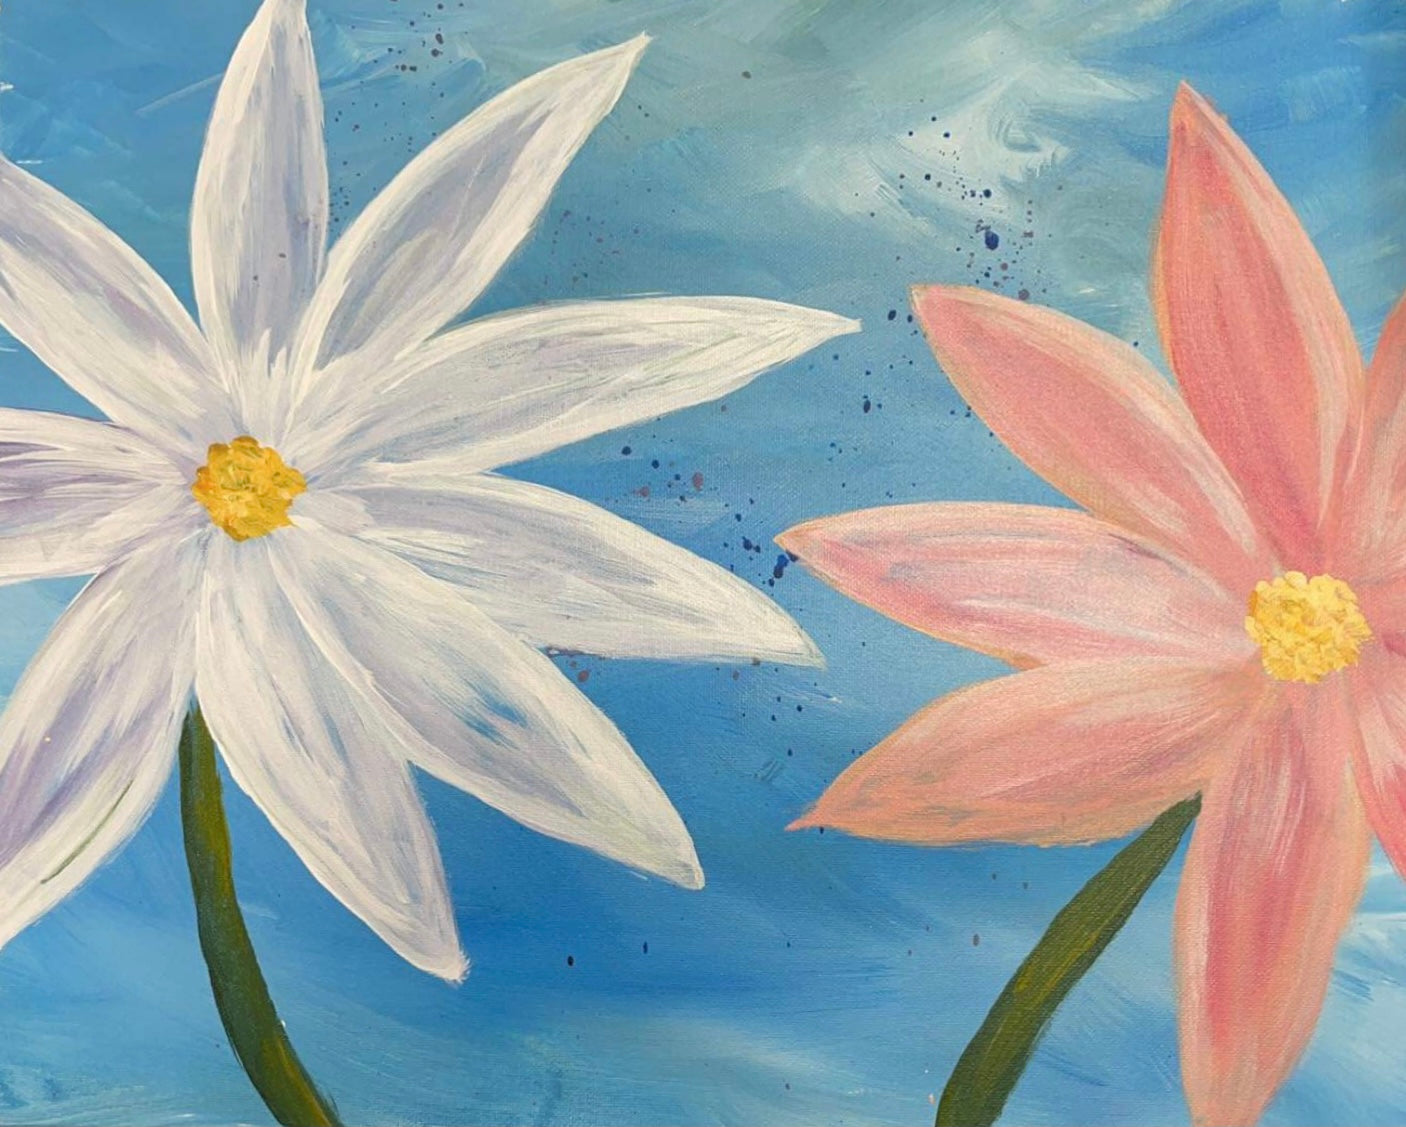 Wed, Sep 6th, 4-6P “Kids Paint: Daisy Power” Public Houston Painting Class